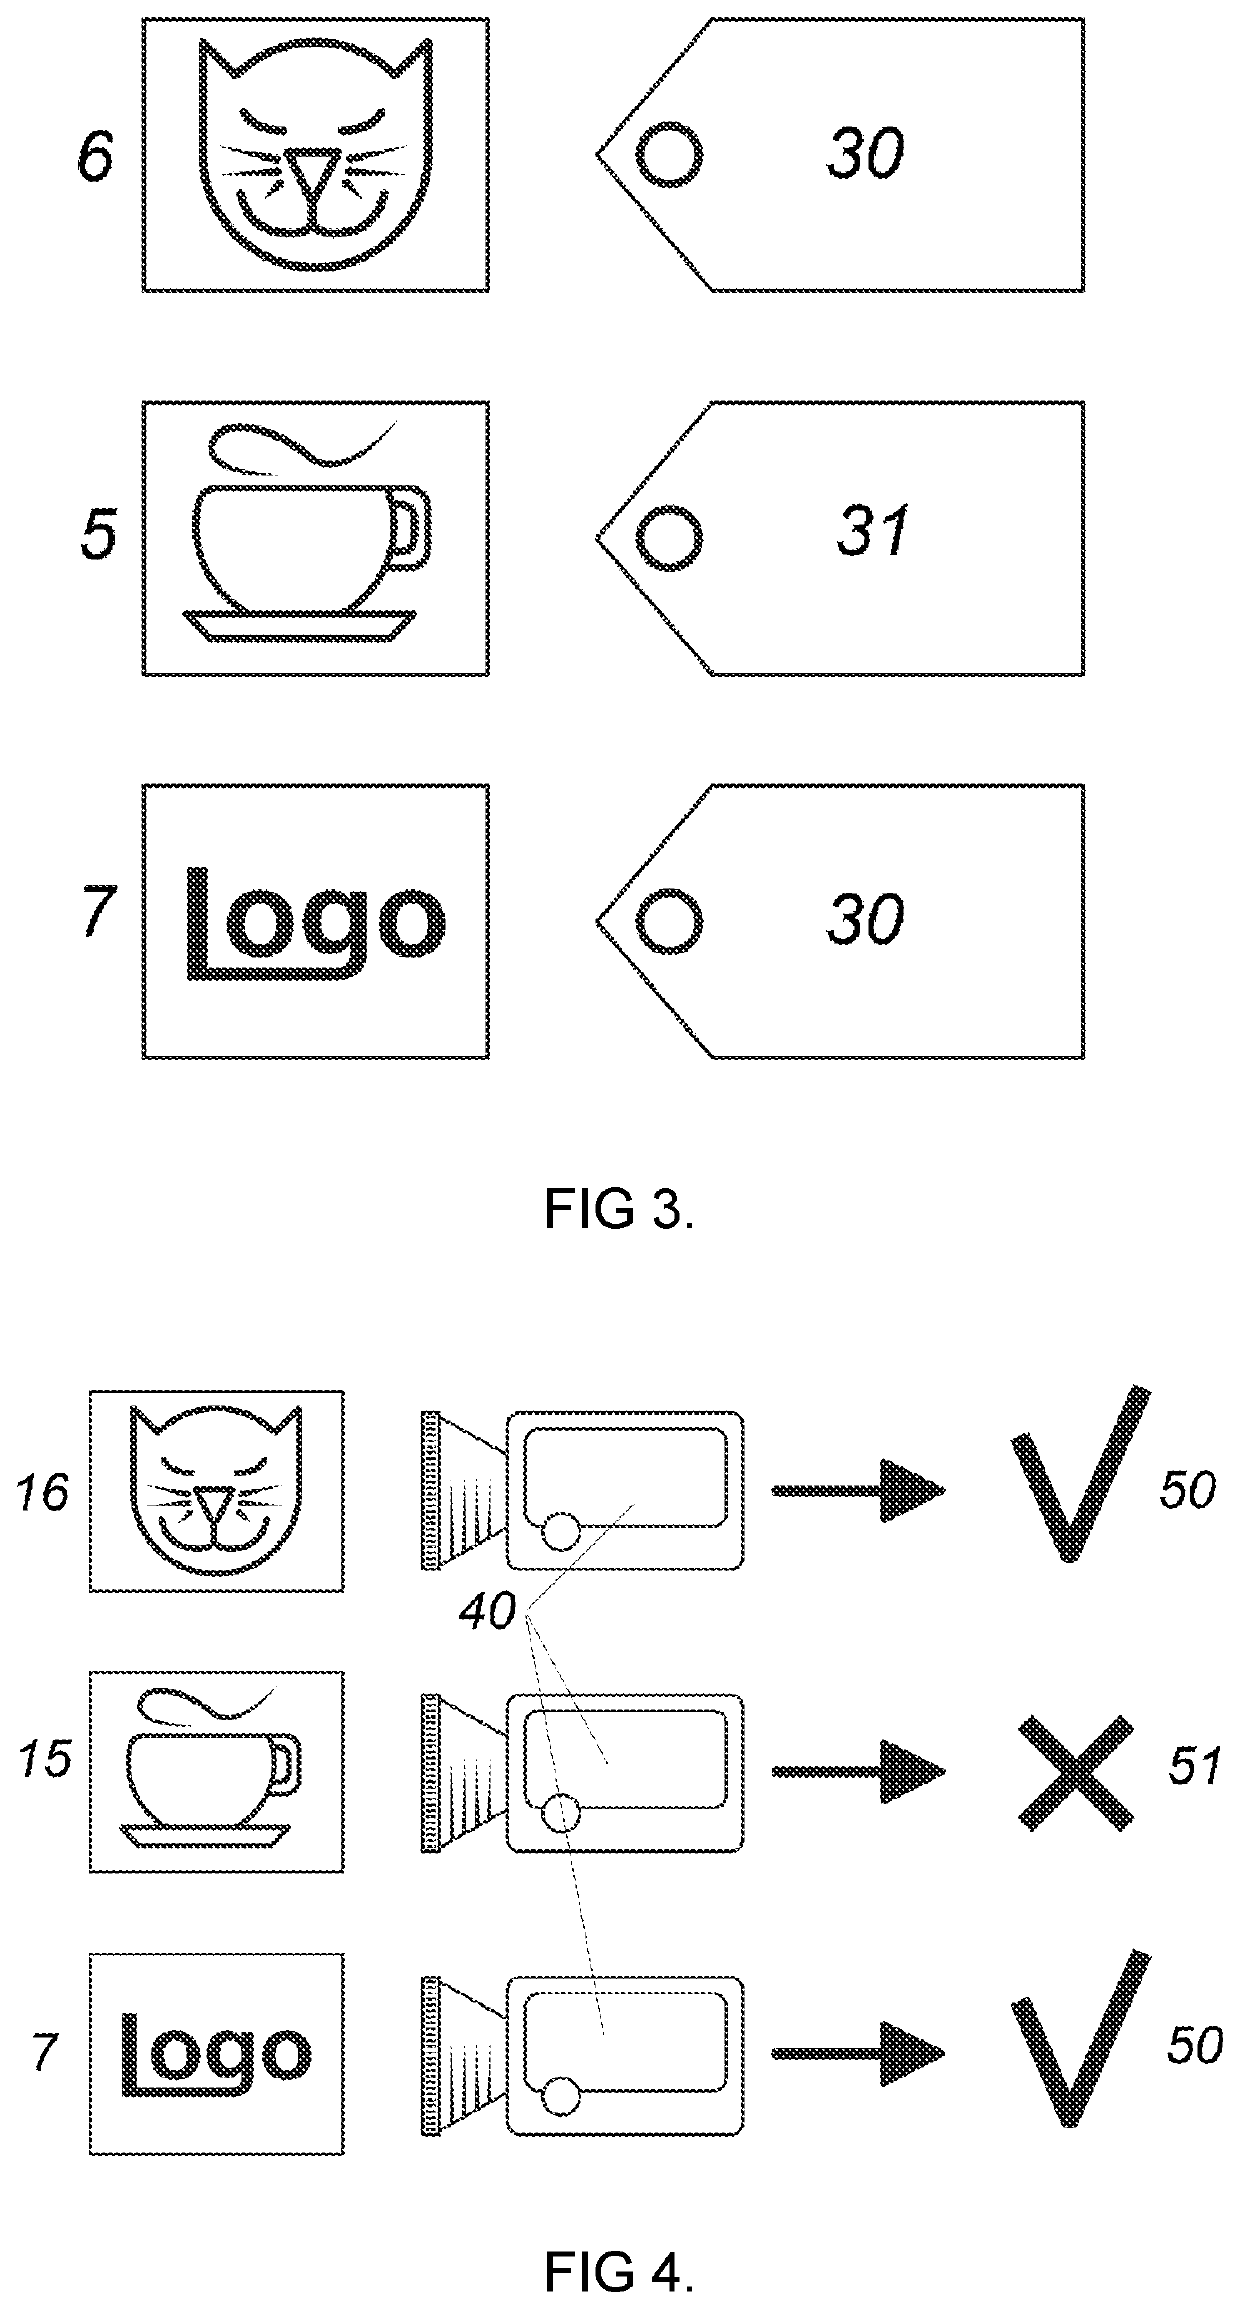 Method for protecting the intellectual property rights of a trained machine learning network model using digital watermarking by adding, on purpose, an anomaly to the training data